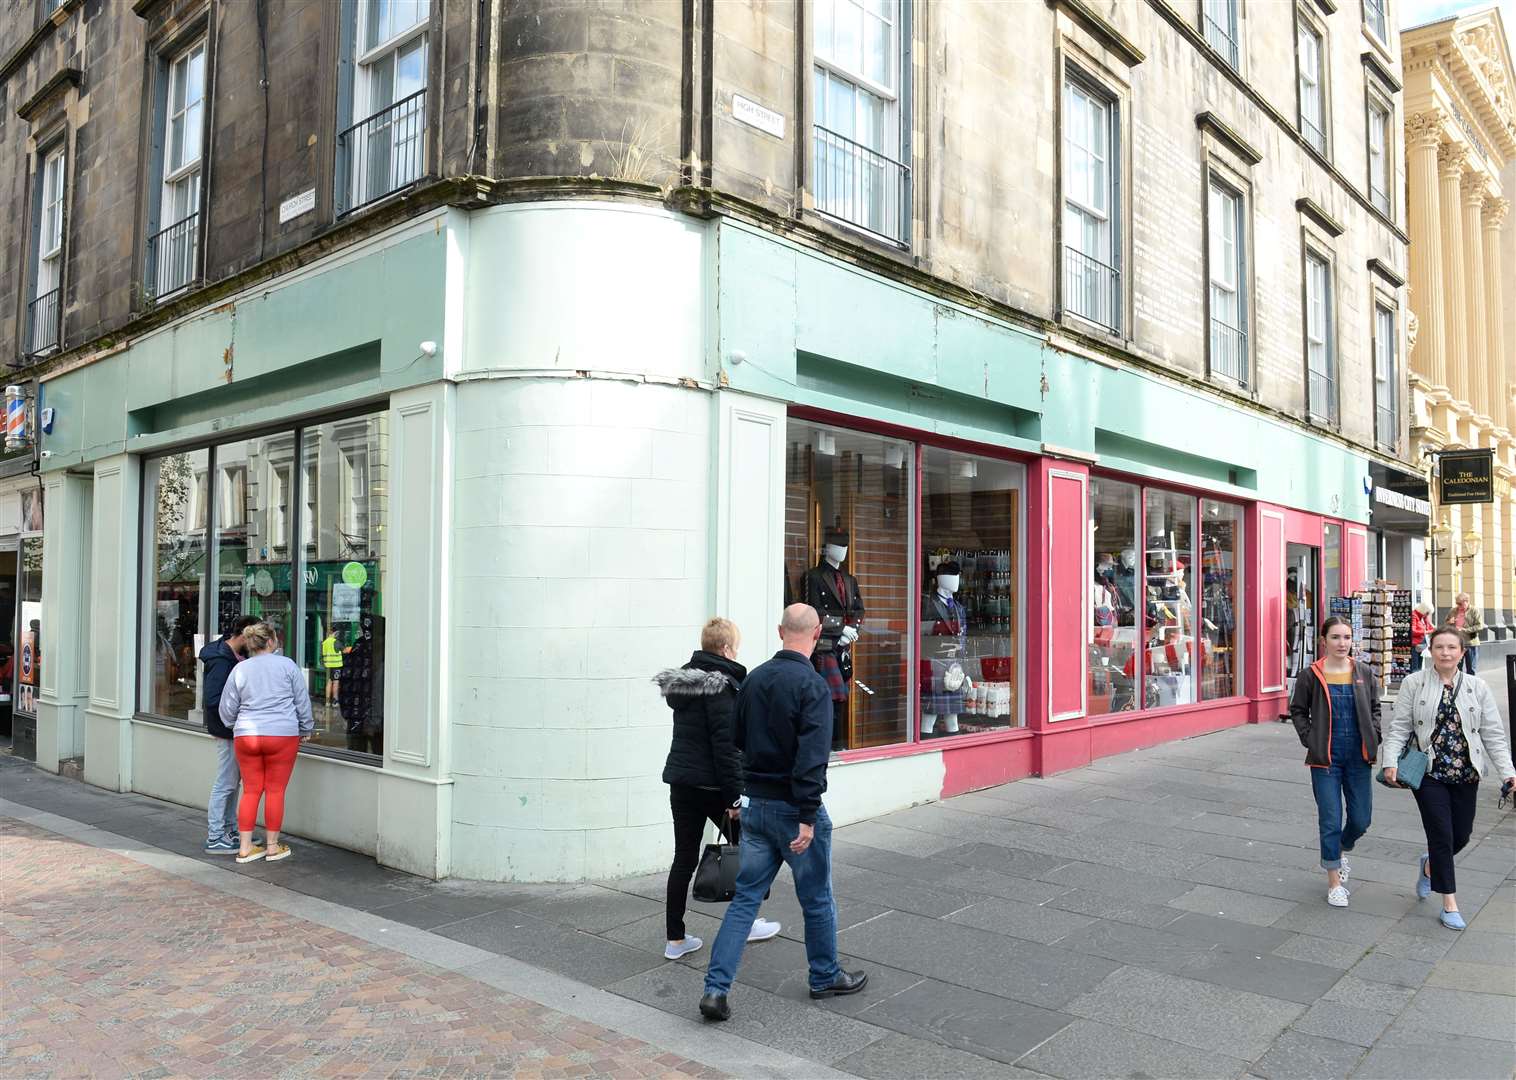 Highland Council planners objected to the bright pink paint job at the former So Coco café.